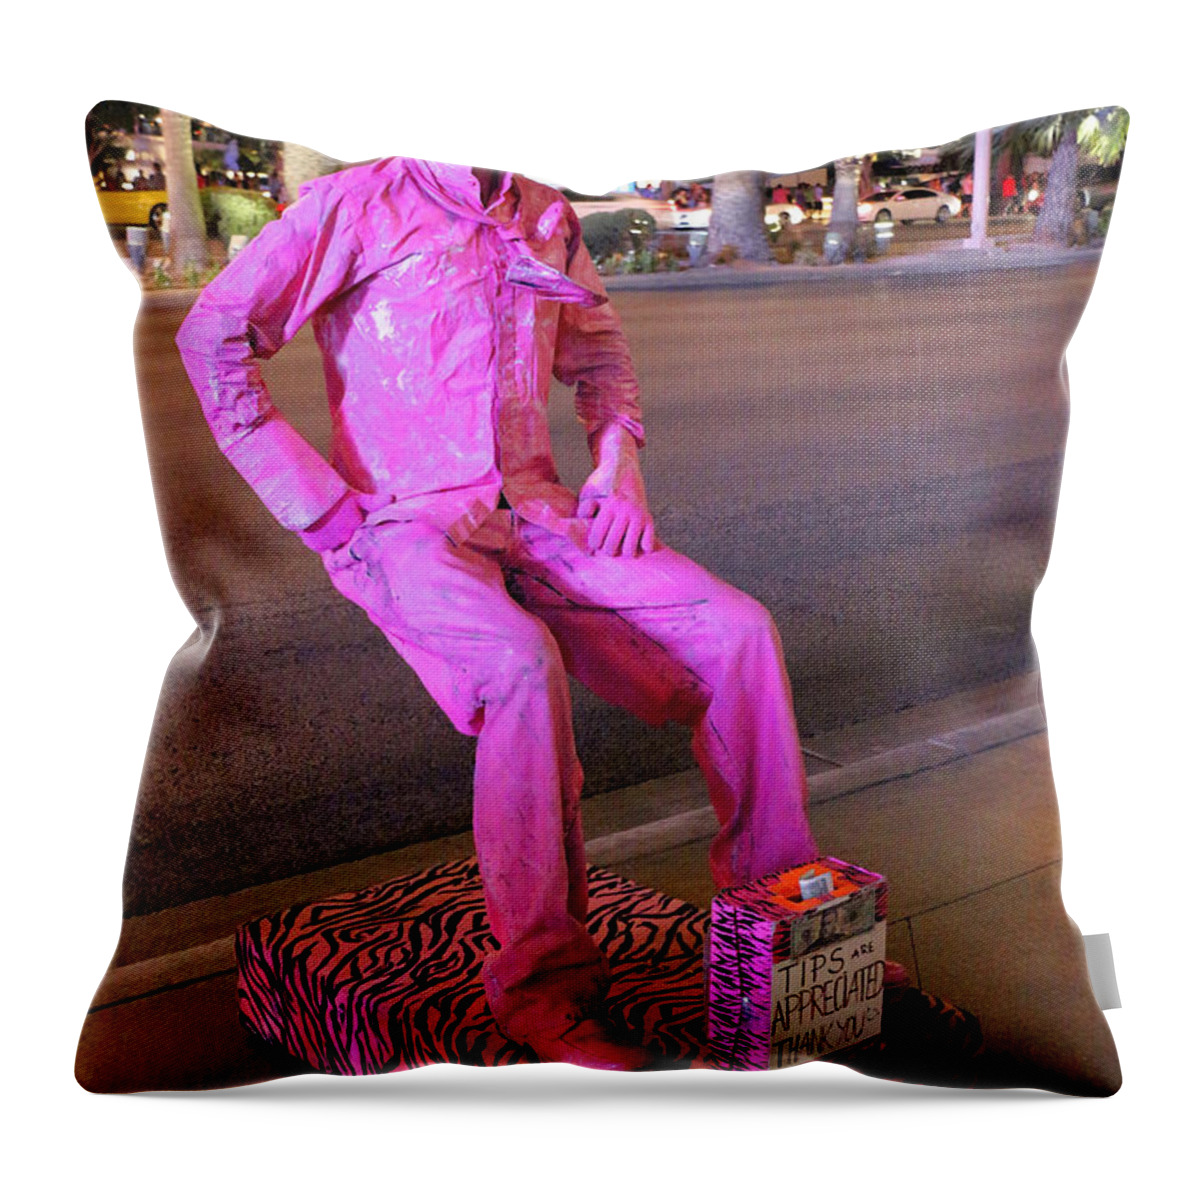 Las Vegas Throw Pillow featuring the photograph The Man Who Sits In The Air by Iryna Goodall